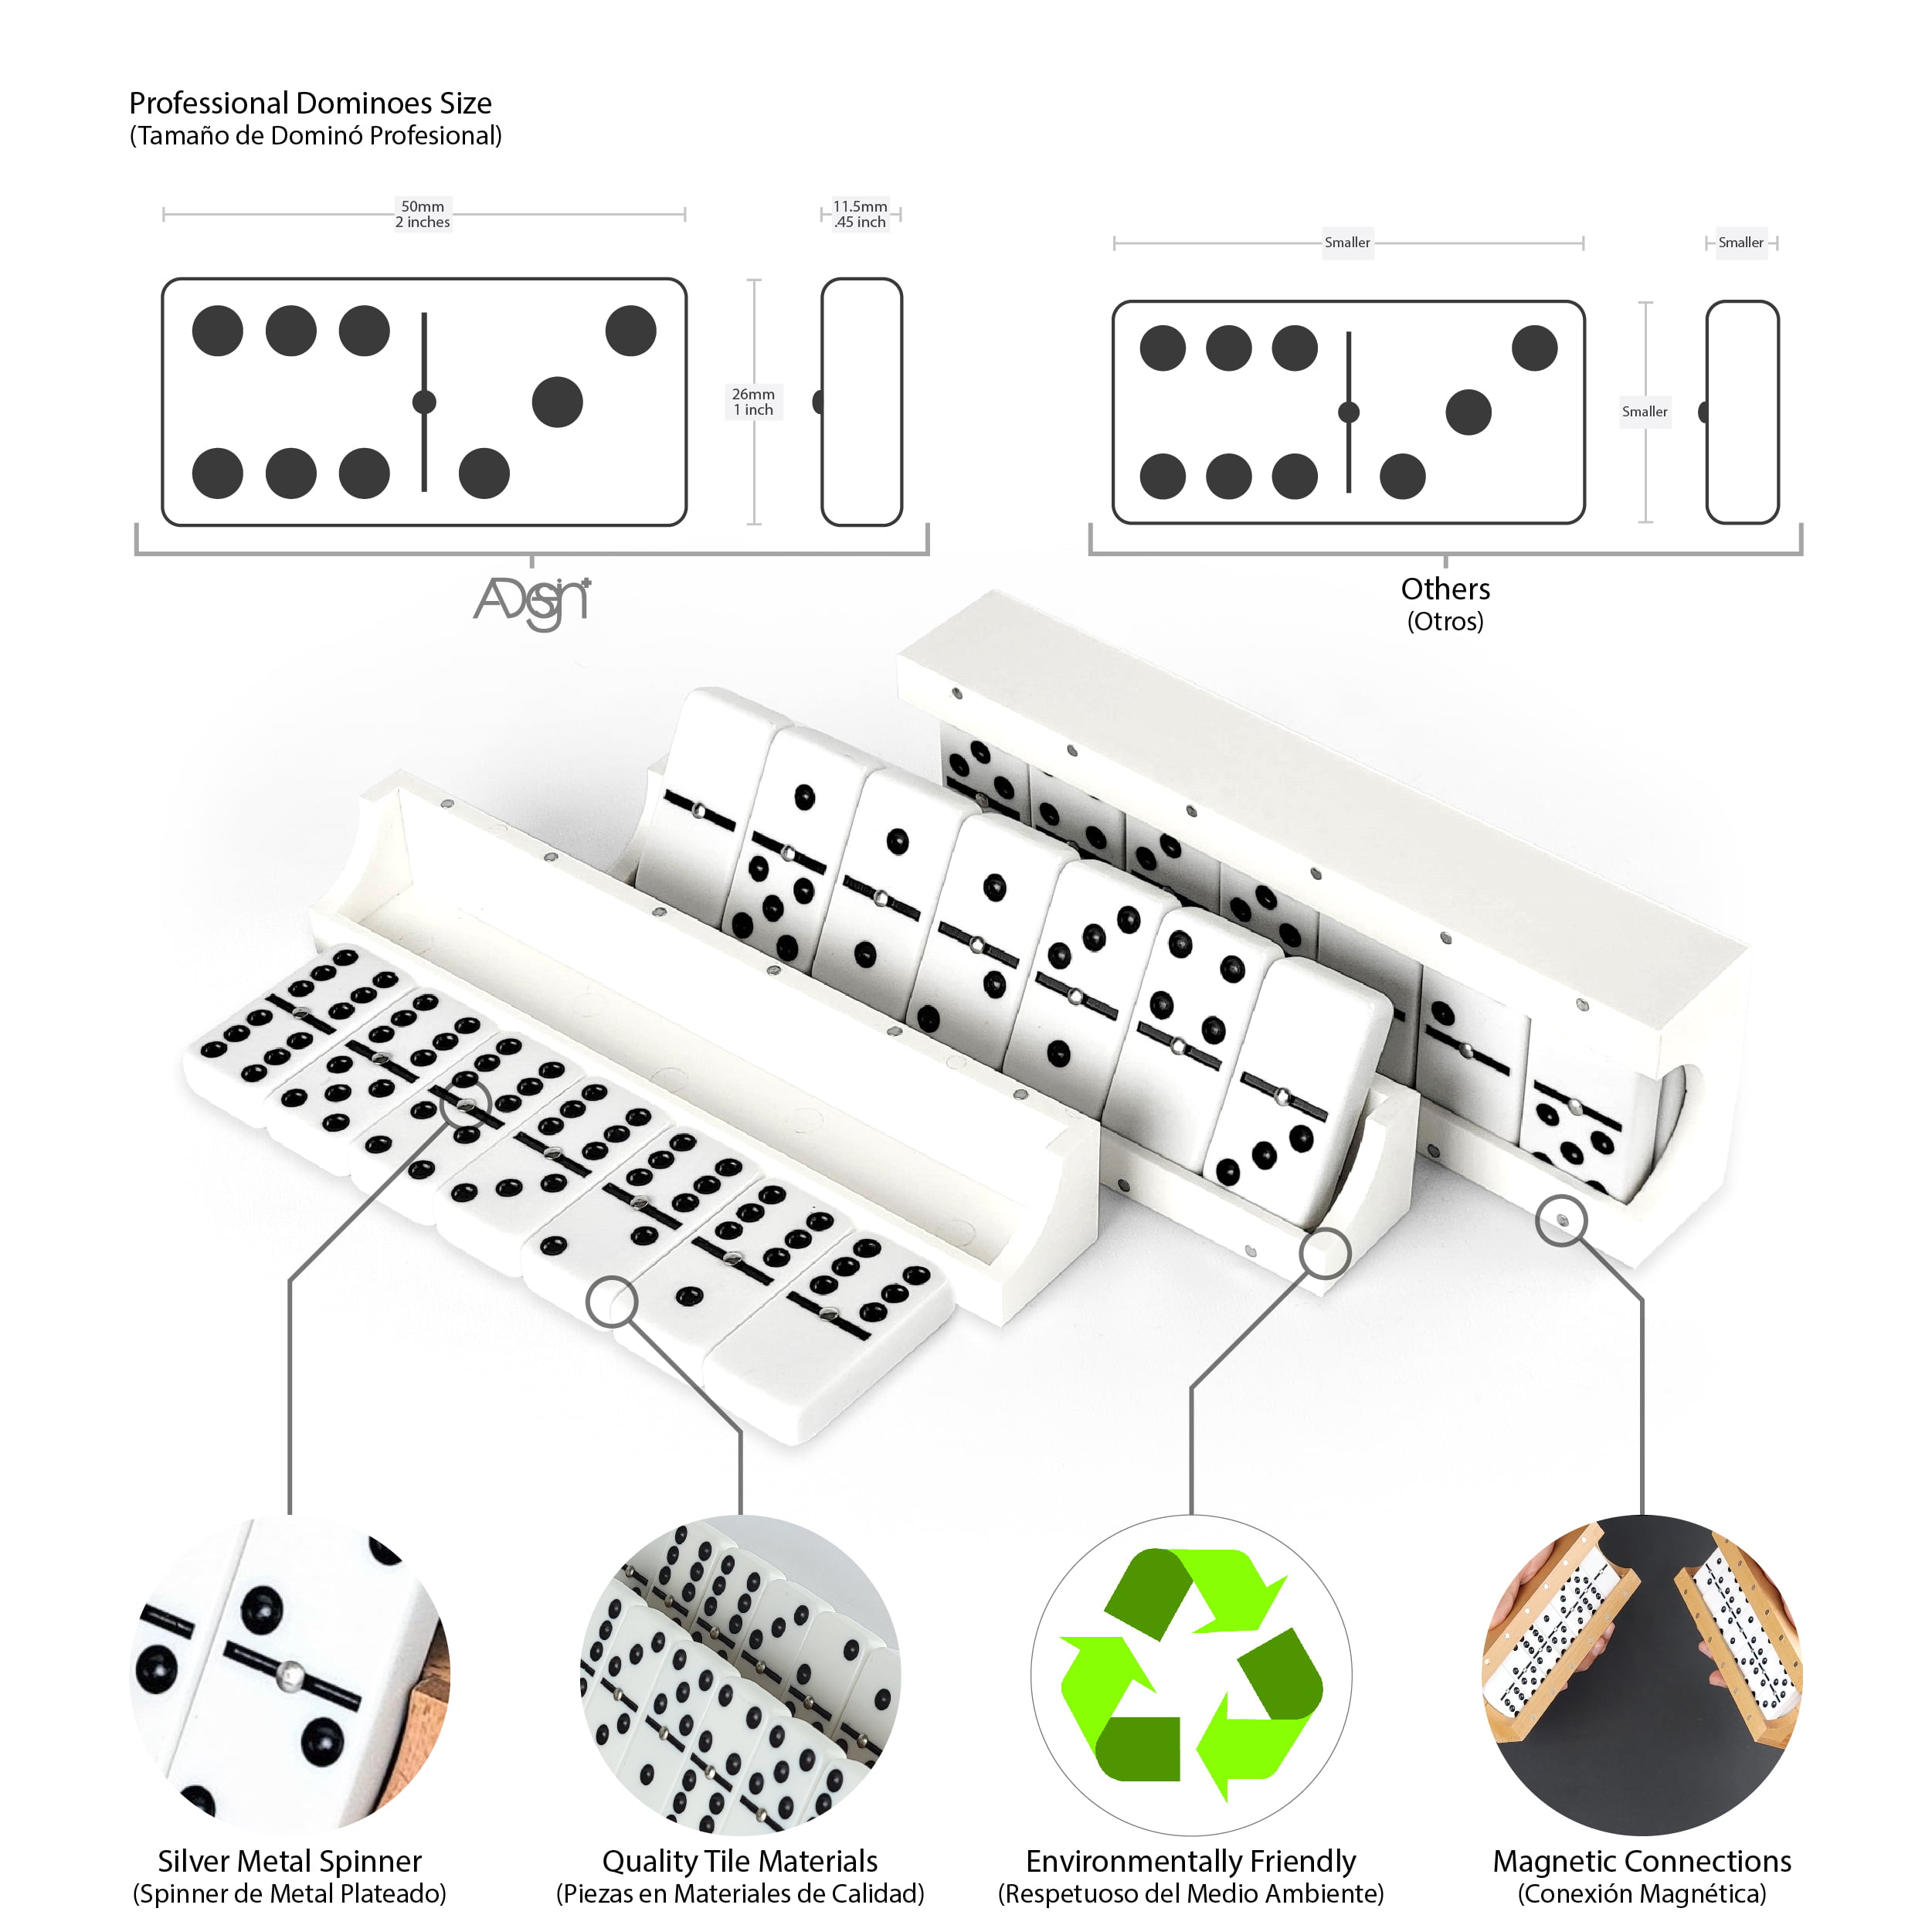 Domino Game Set of 28, Professional Double 6s